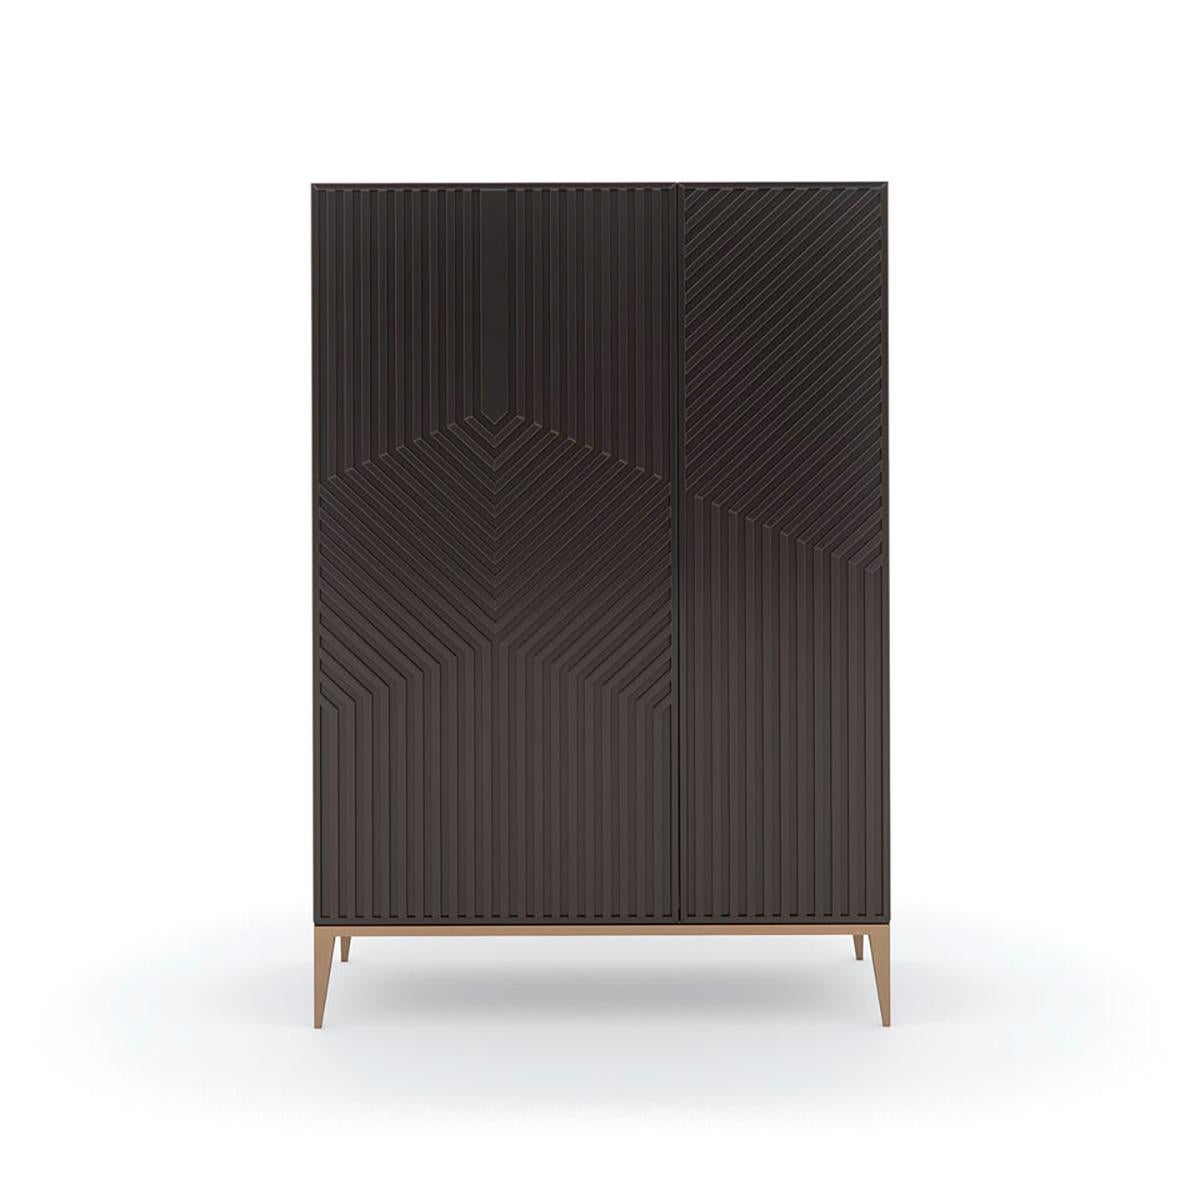 Drawing the eye with its distinctive design, this tall chest or dressing cabinet introduces a bold, modern graphic to any interior. Thin wood strips applied to the door panels create texture and a linear labyrinth for added dimension.

Generous